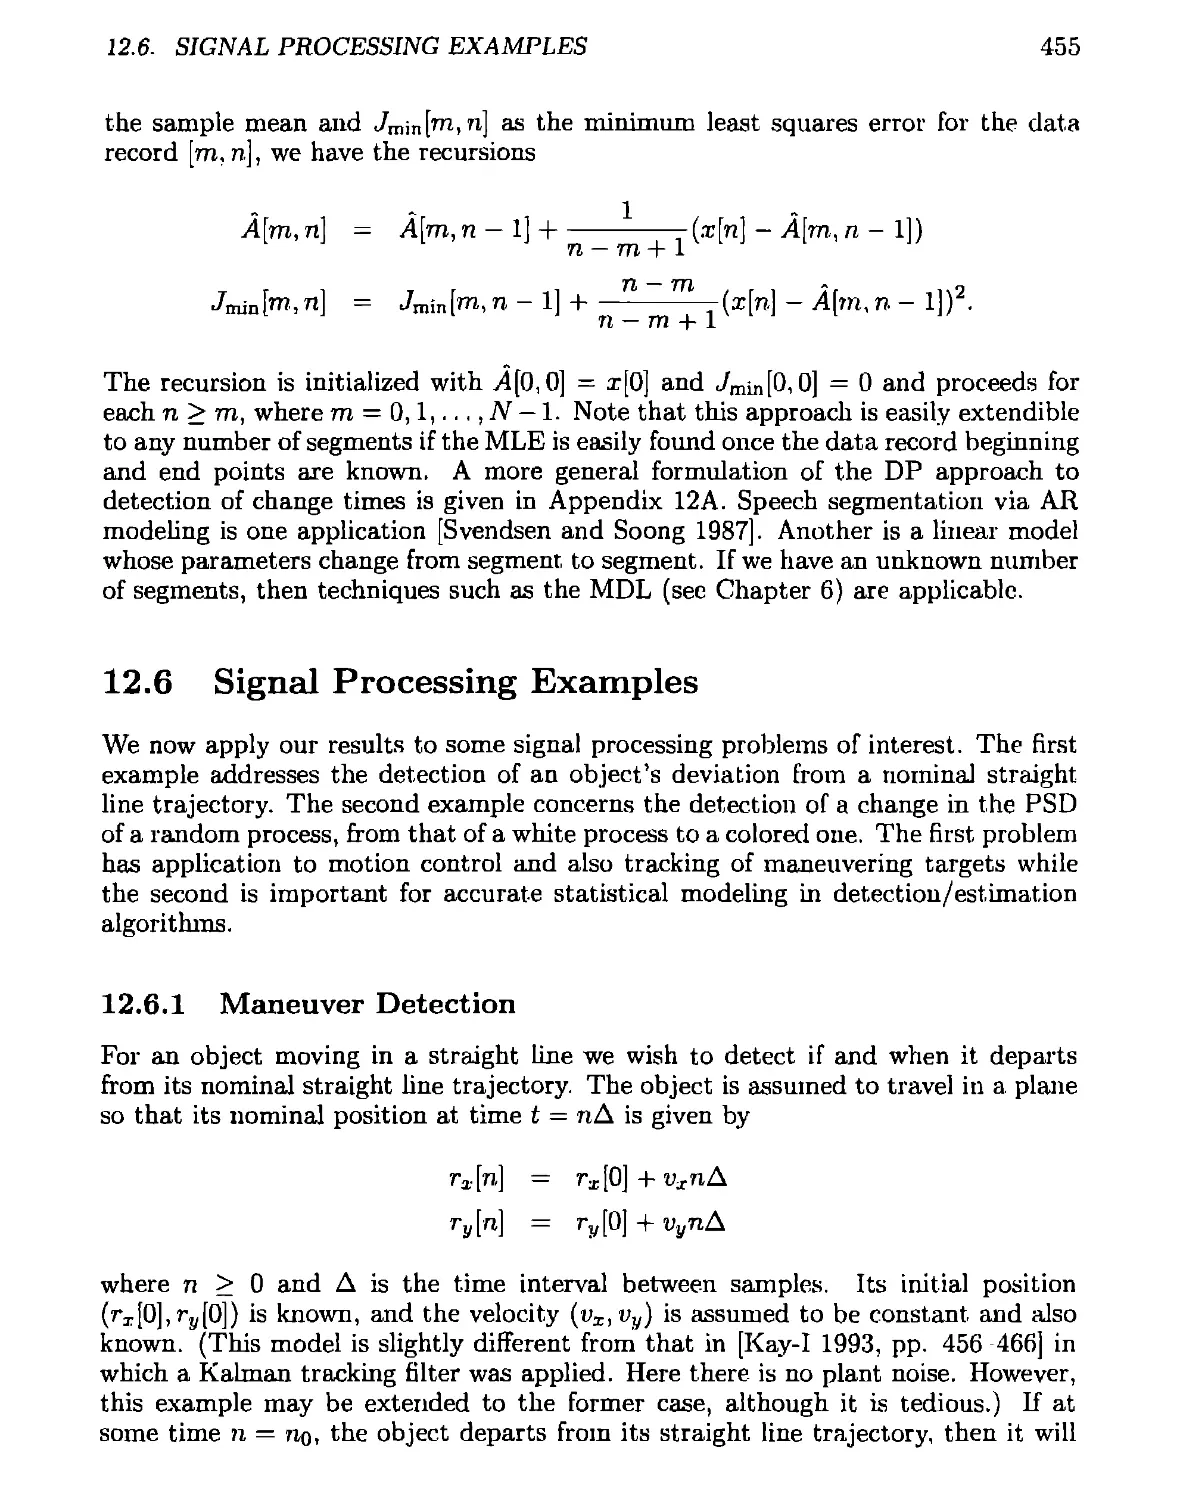 12.6 Signal Processing Examples